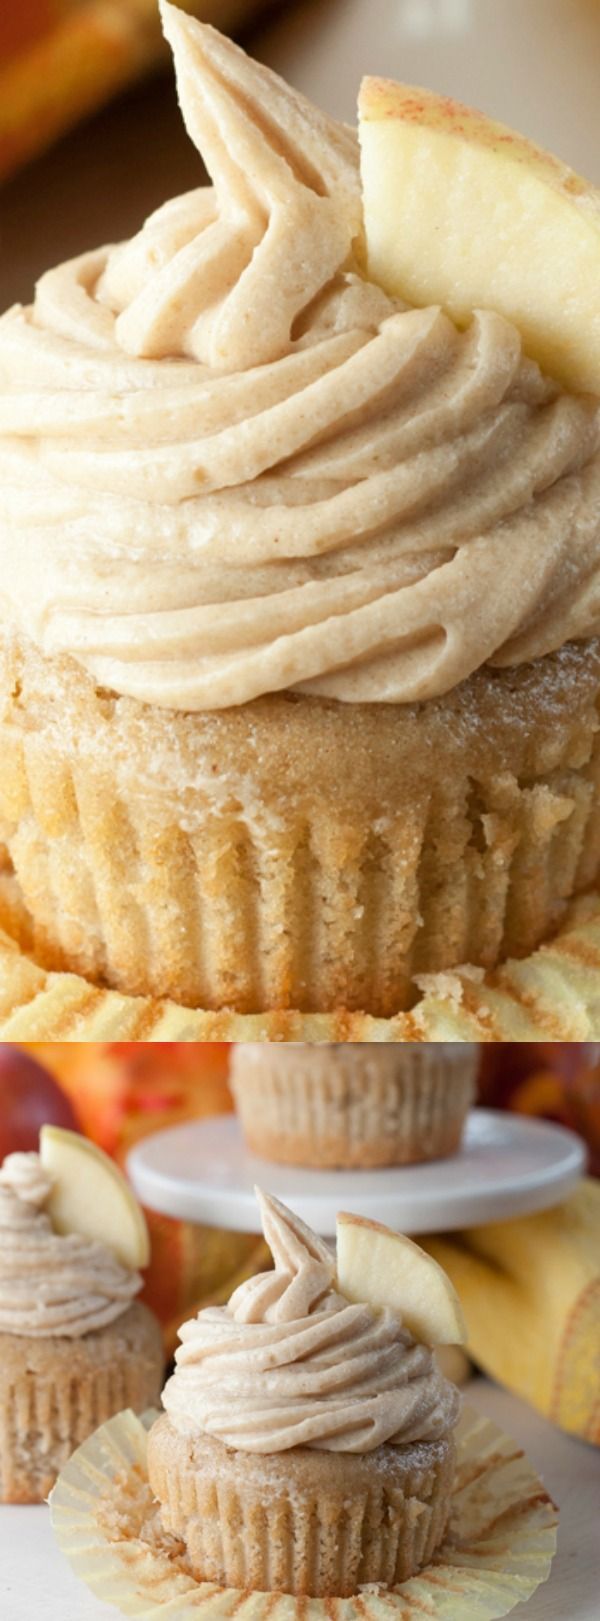 These Apple Cider Cupcakes with Brown Sugar Cinnamon Buttercream Frosting from Wis